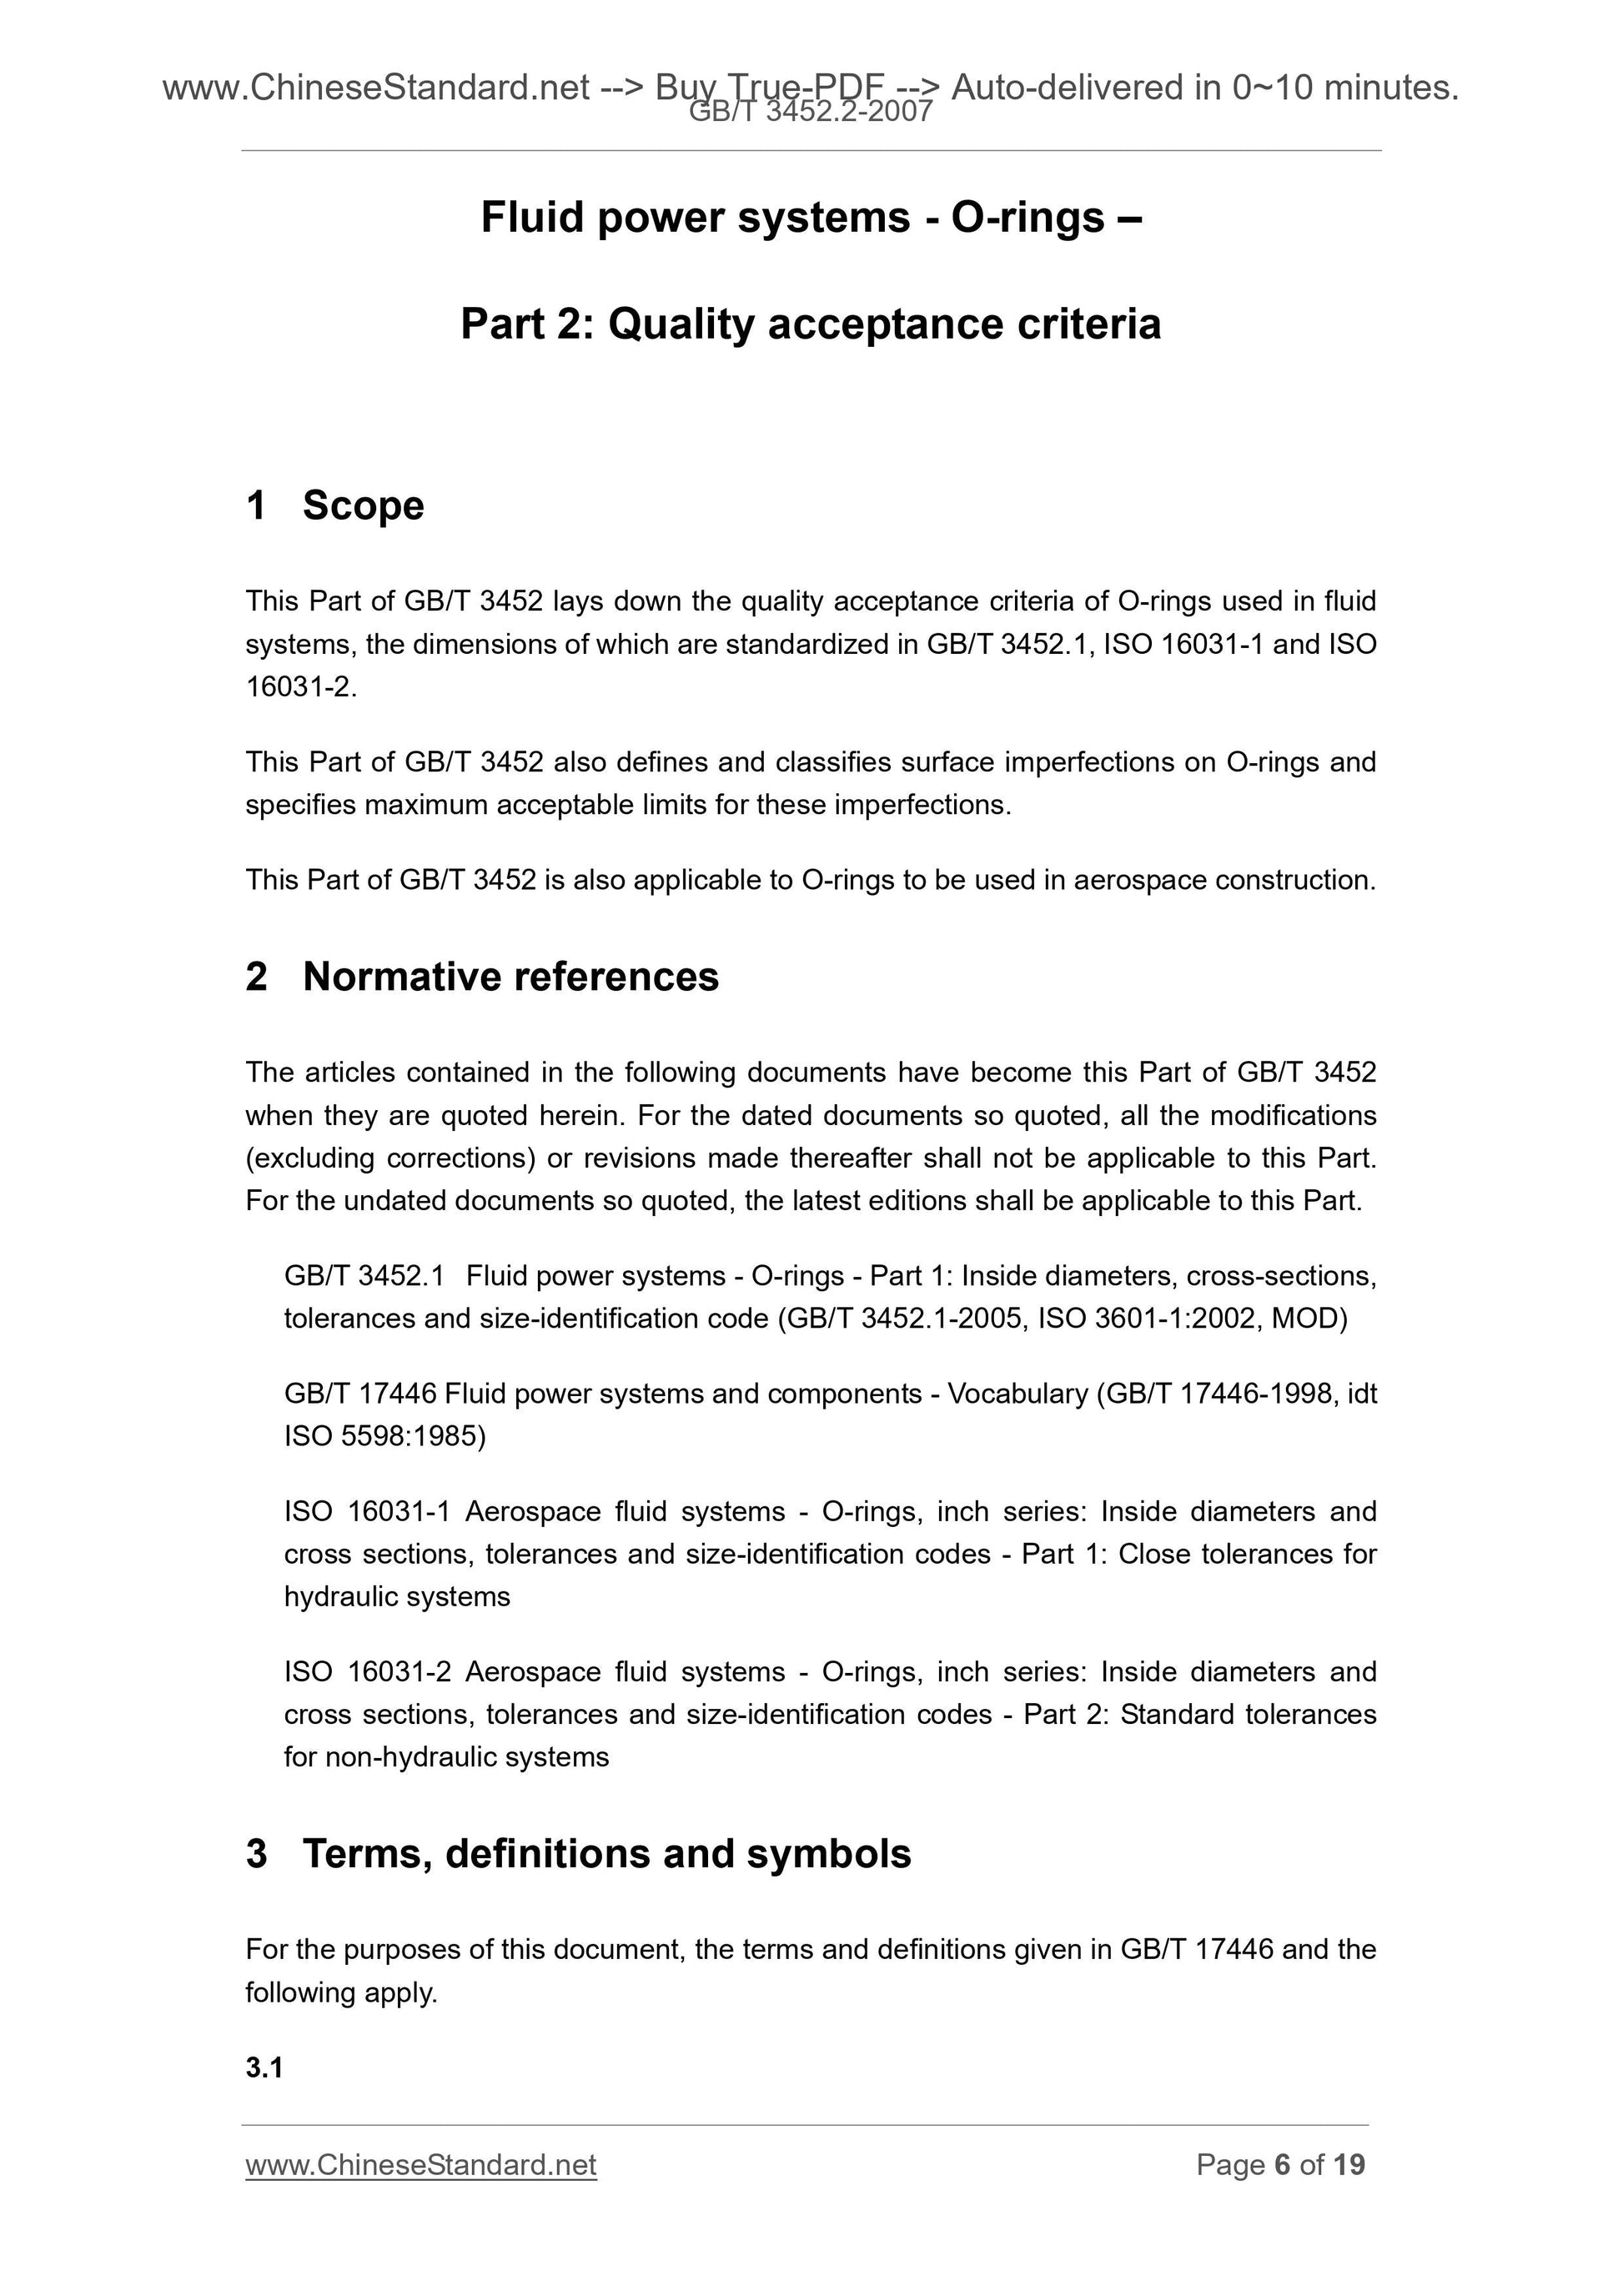 GB/T 3452.2-2007 Page 5